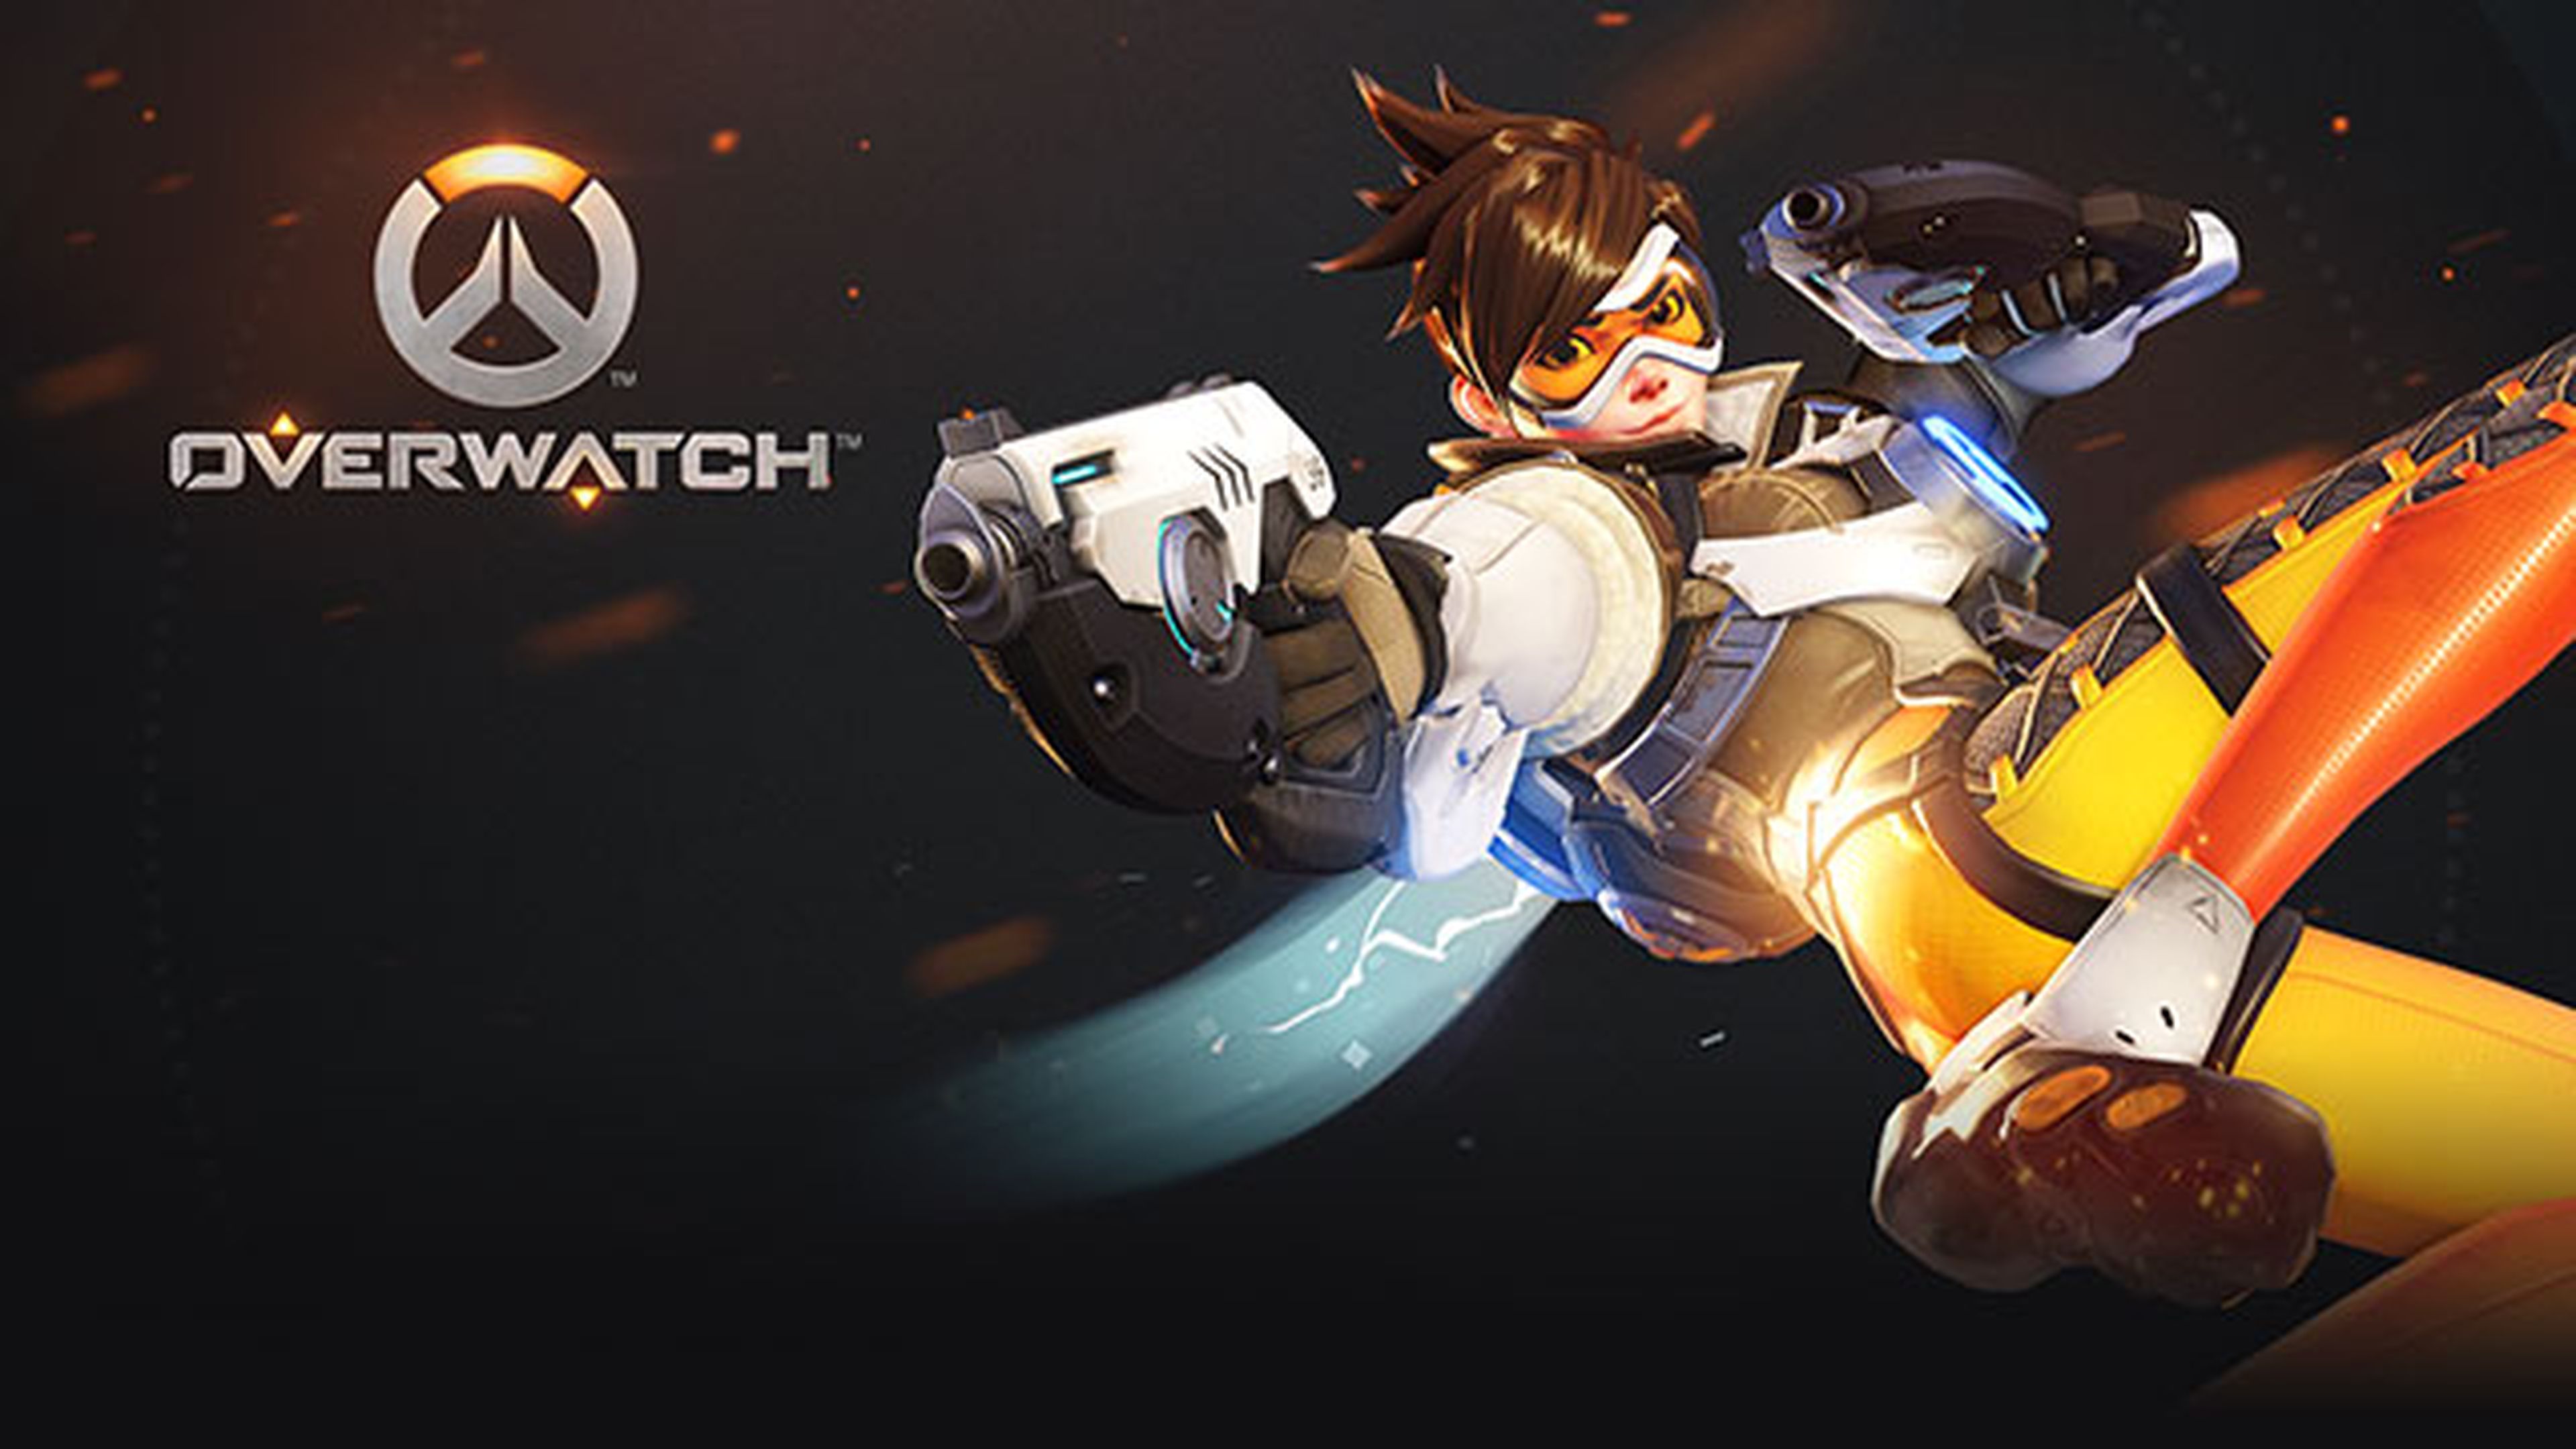 Overwatch - avance para PS4, PC y Xbox One